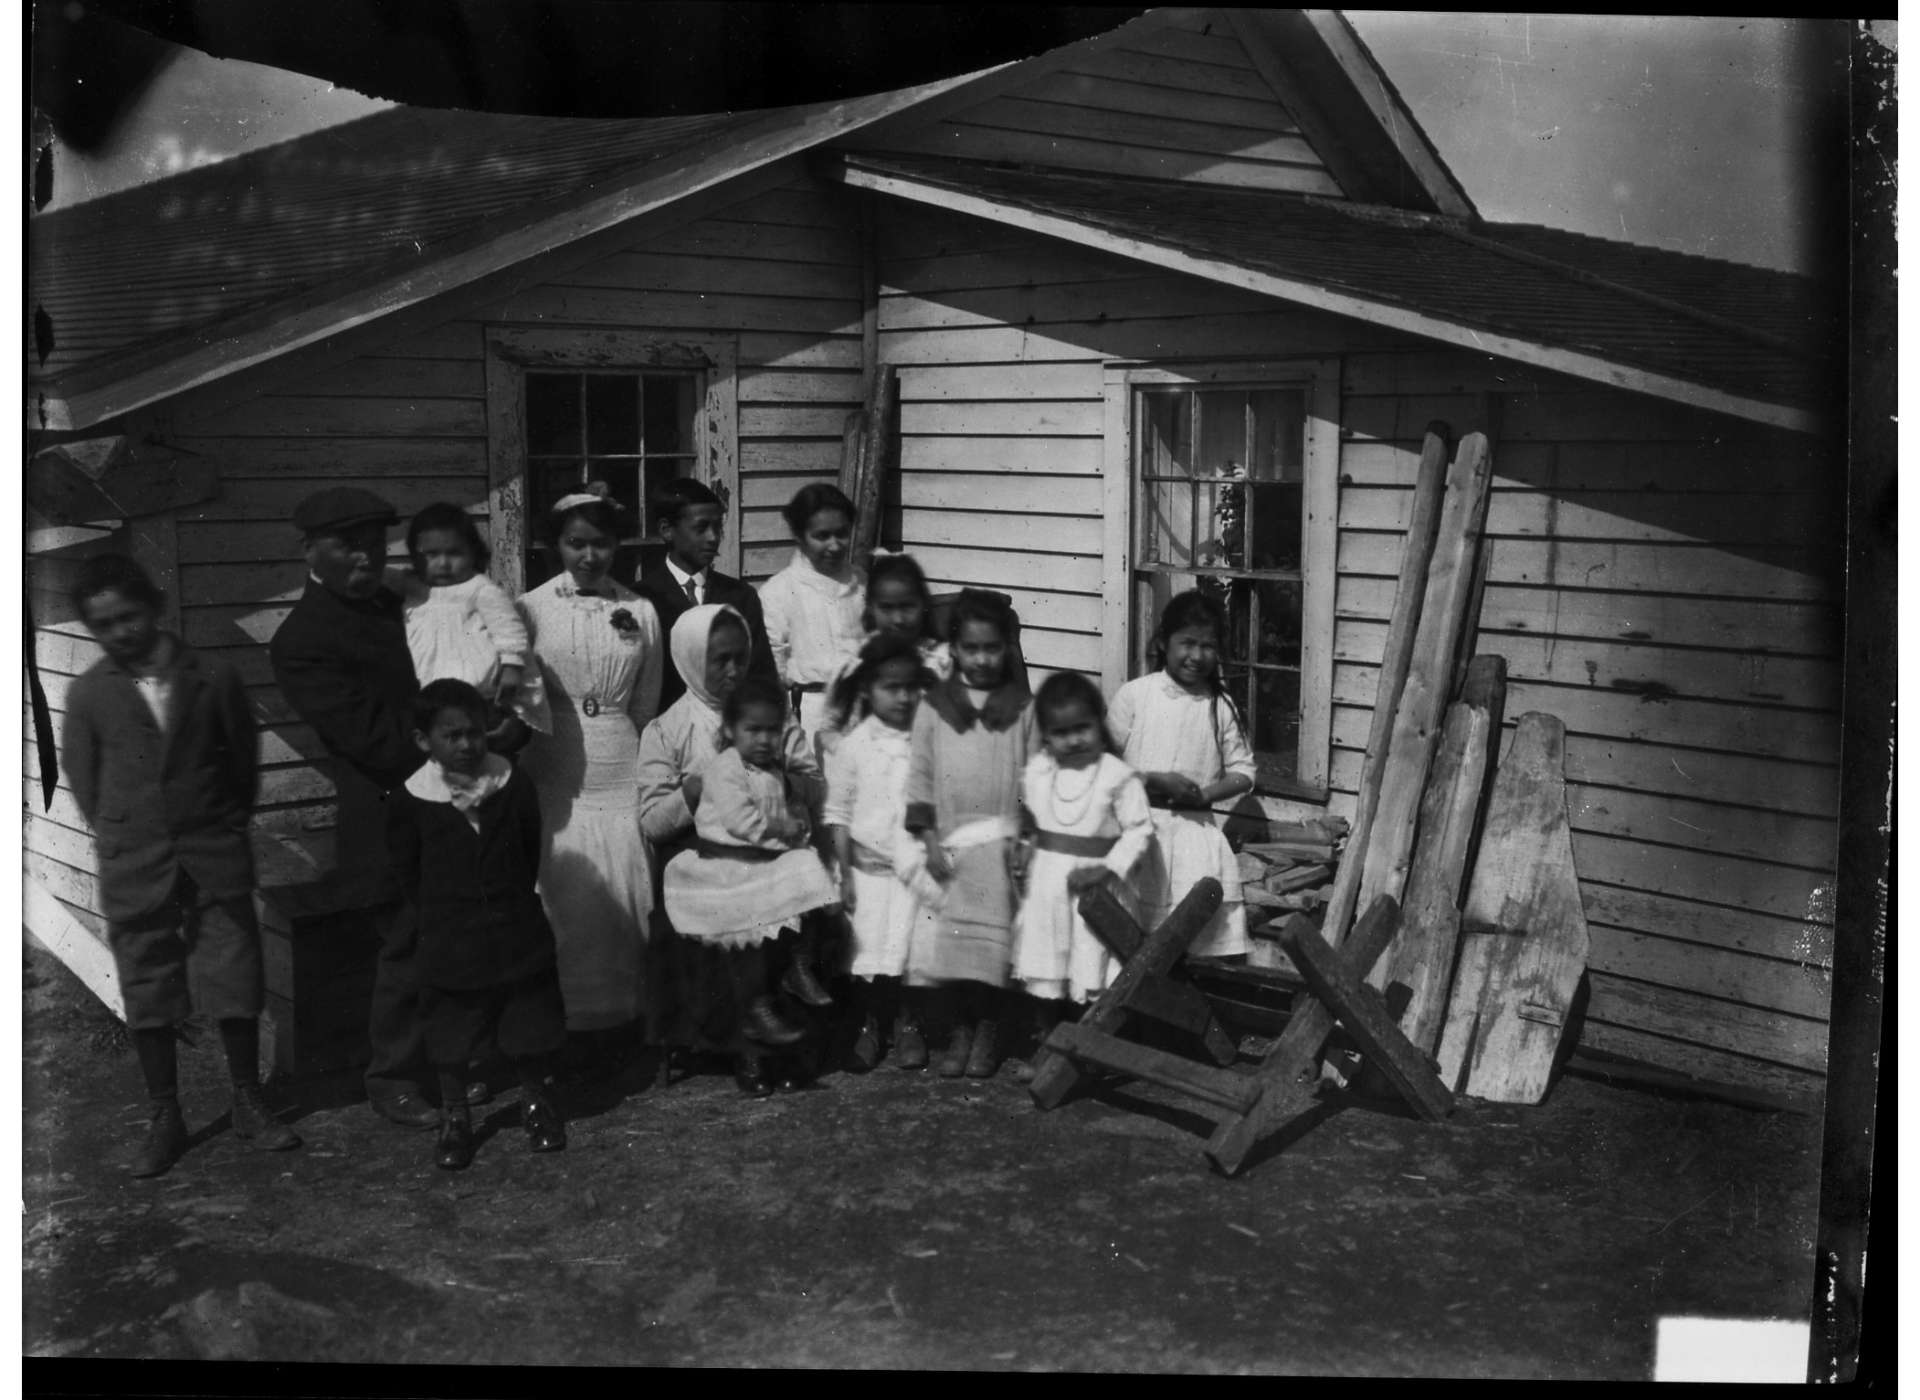 An Unangan family (possibly celebrating a wedding) from St. Paul Island, 1920s. Photographer G. Dallas Hanna. Courtesy of the National Archives and Records Administration.